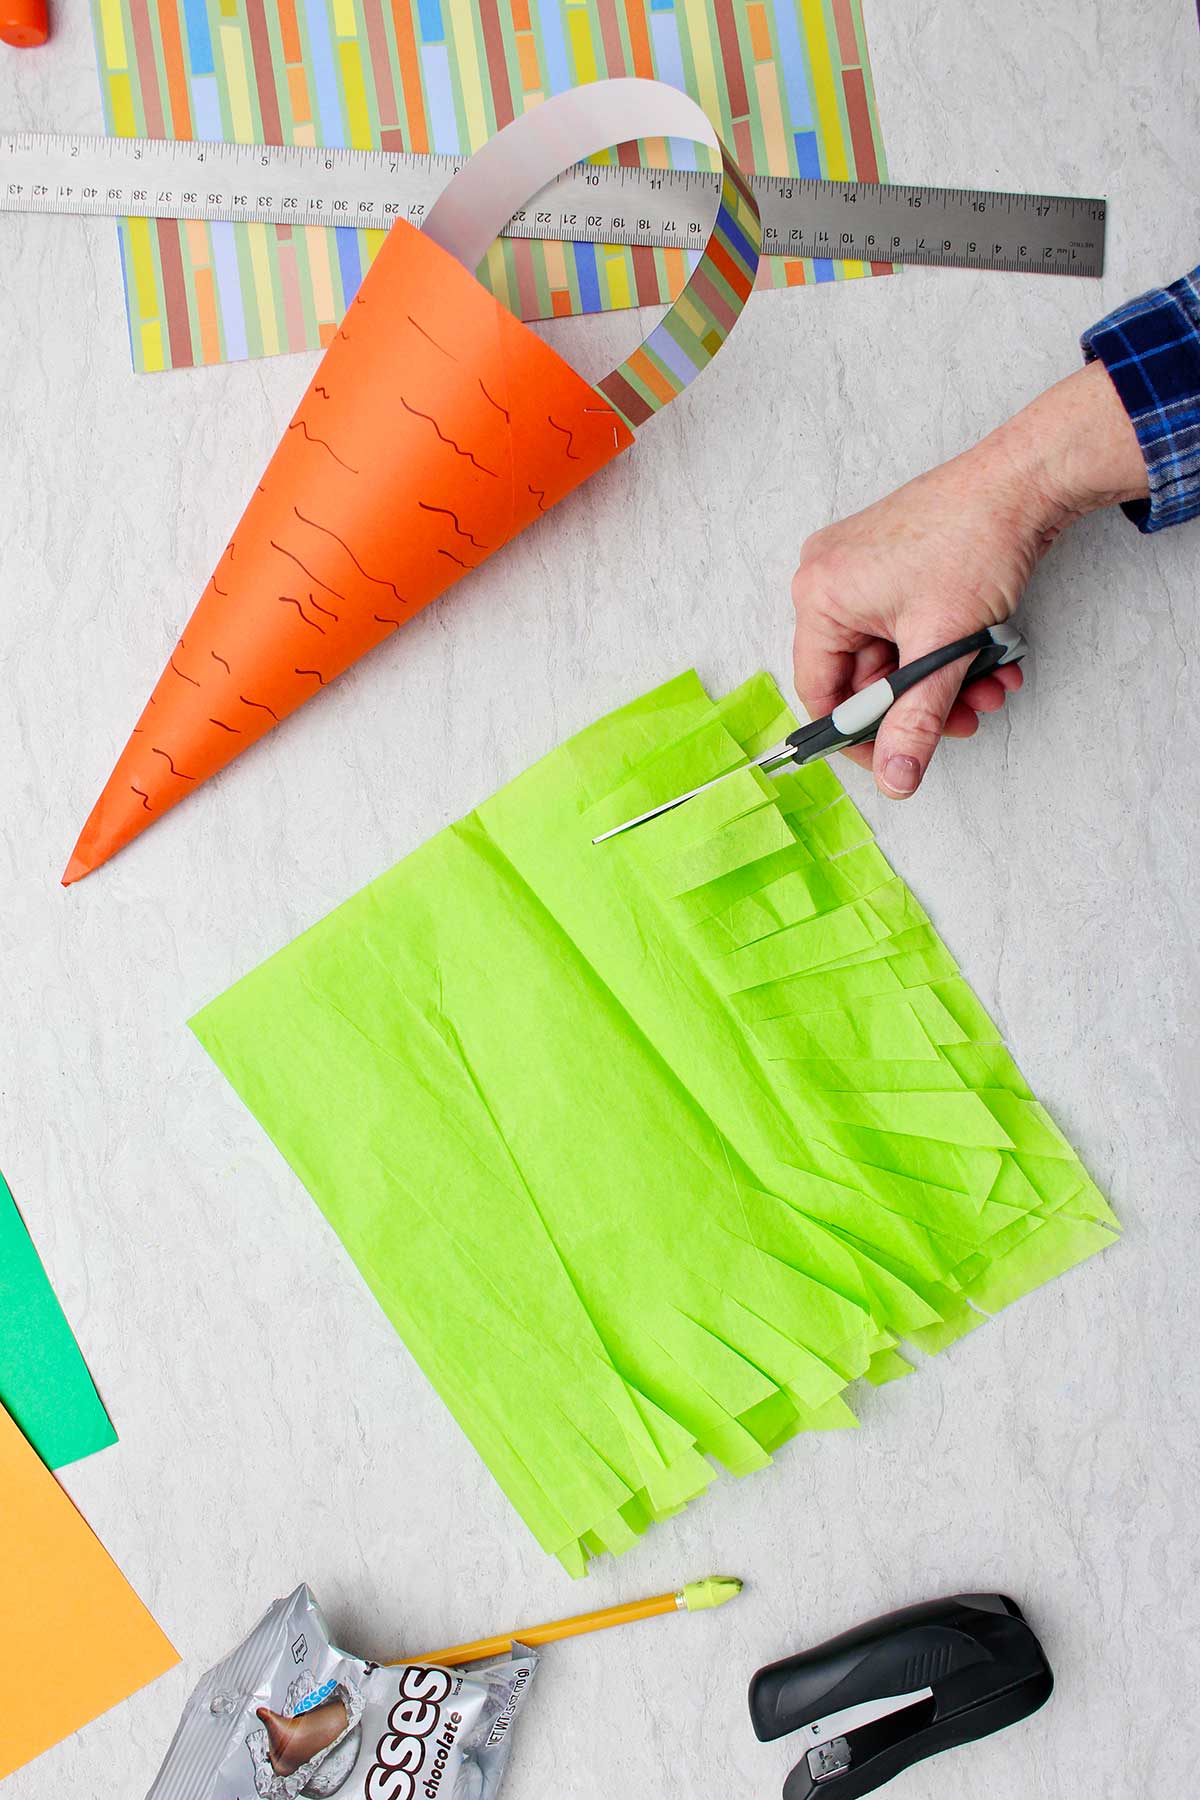 Hand cutting green tissue paper to make grass for carrot Easter basket.